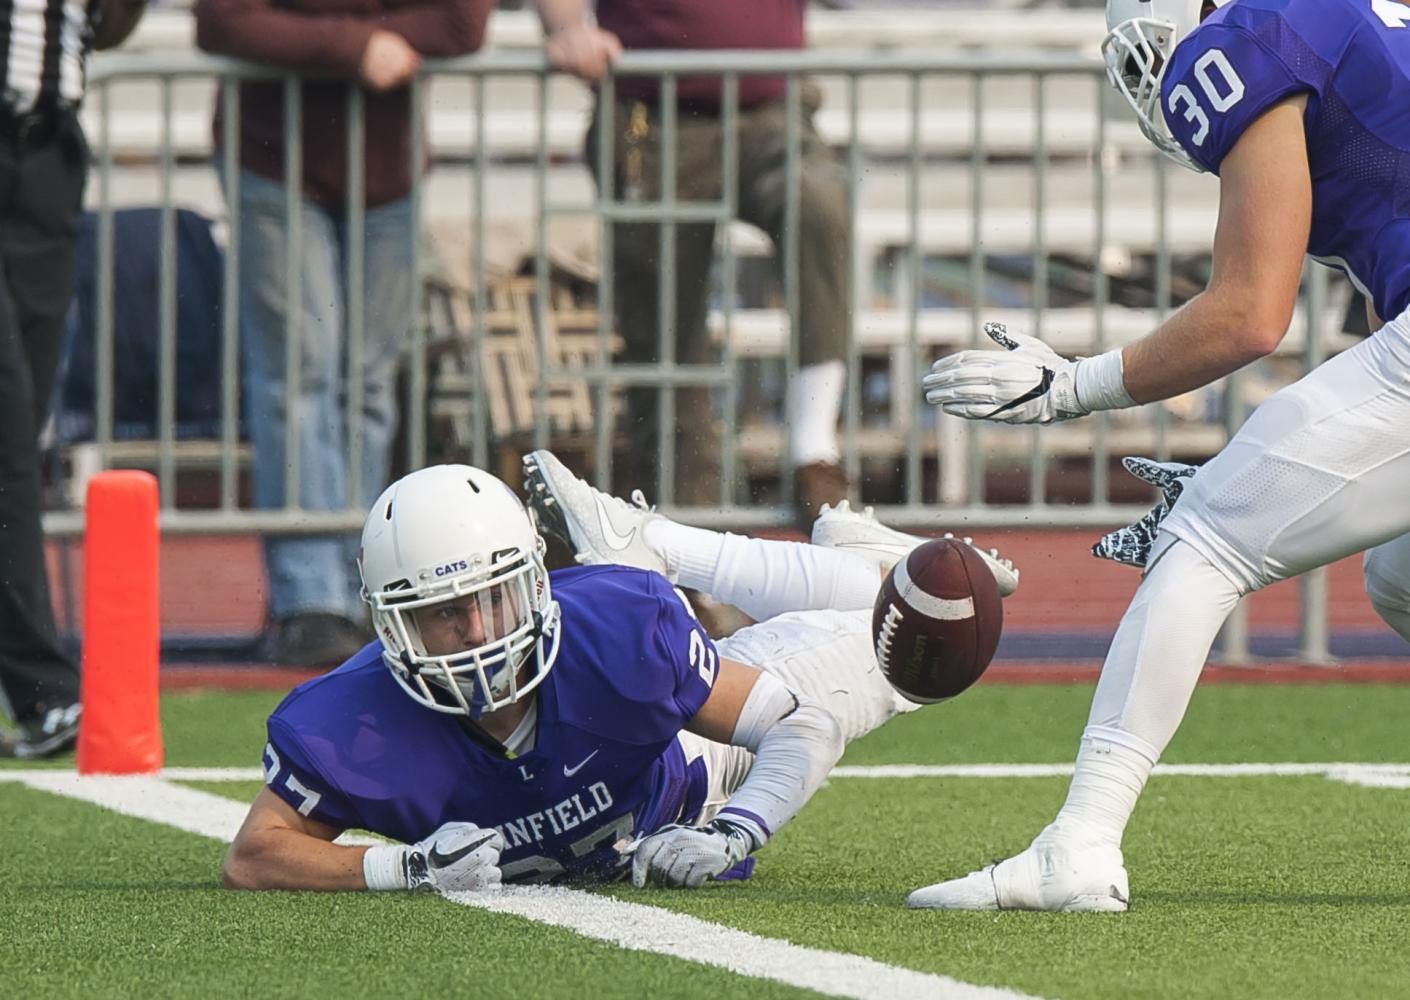 Linfield’s Keegan Weiss just fails to down a 48-yard punt by Colton Ramos inside the 1-yard line in the Wildcat’s final drive of the third quarter. Mary Hardin-Baylor led 17-3 at the time and won the game 24-3.
